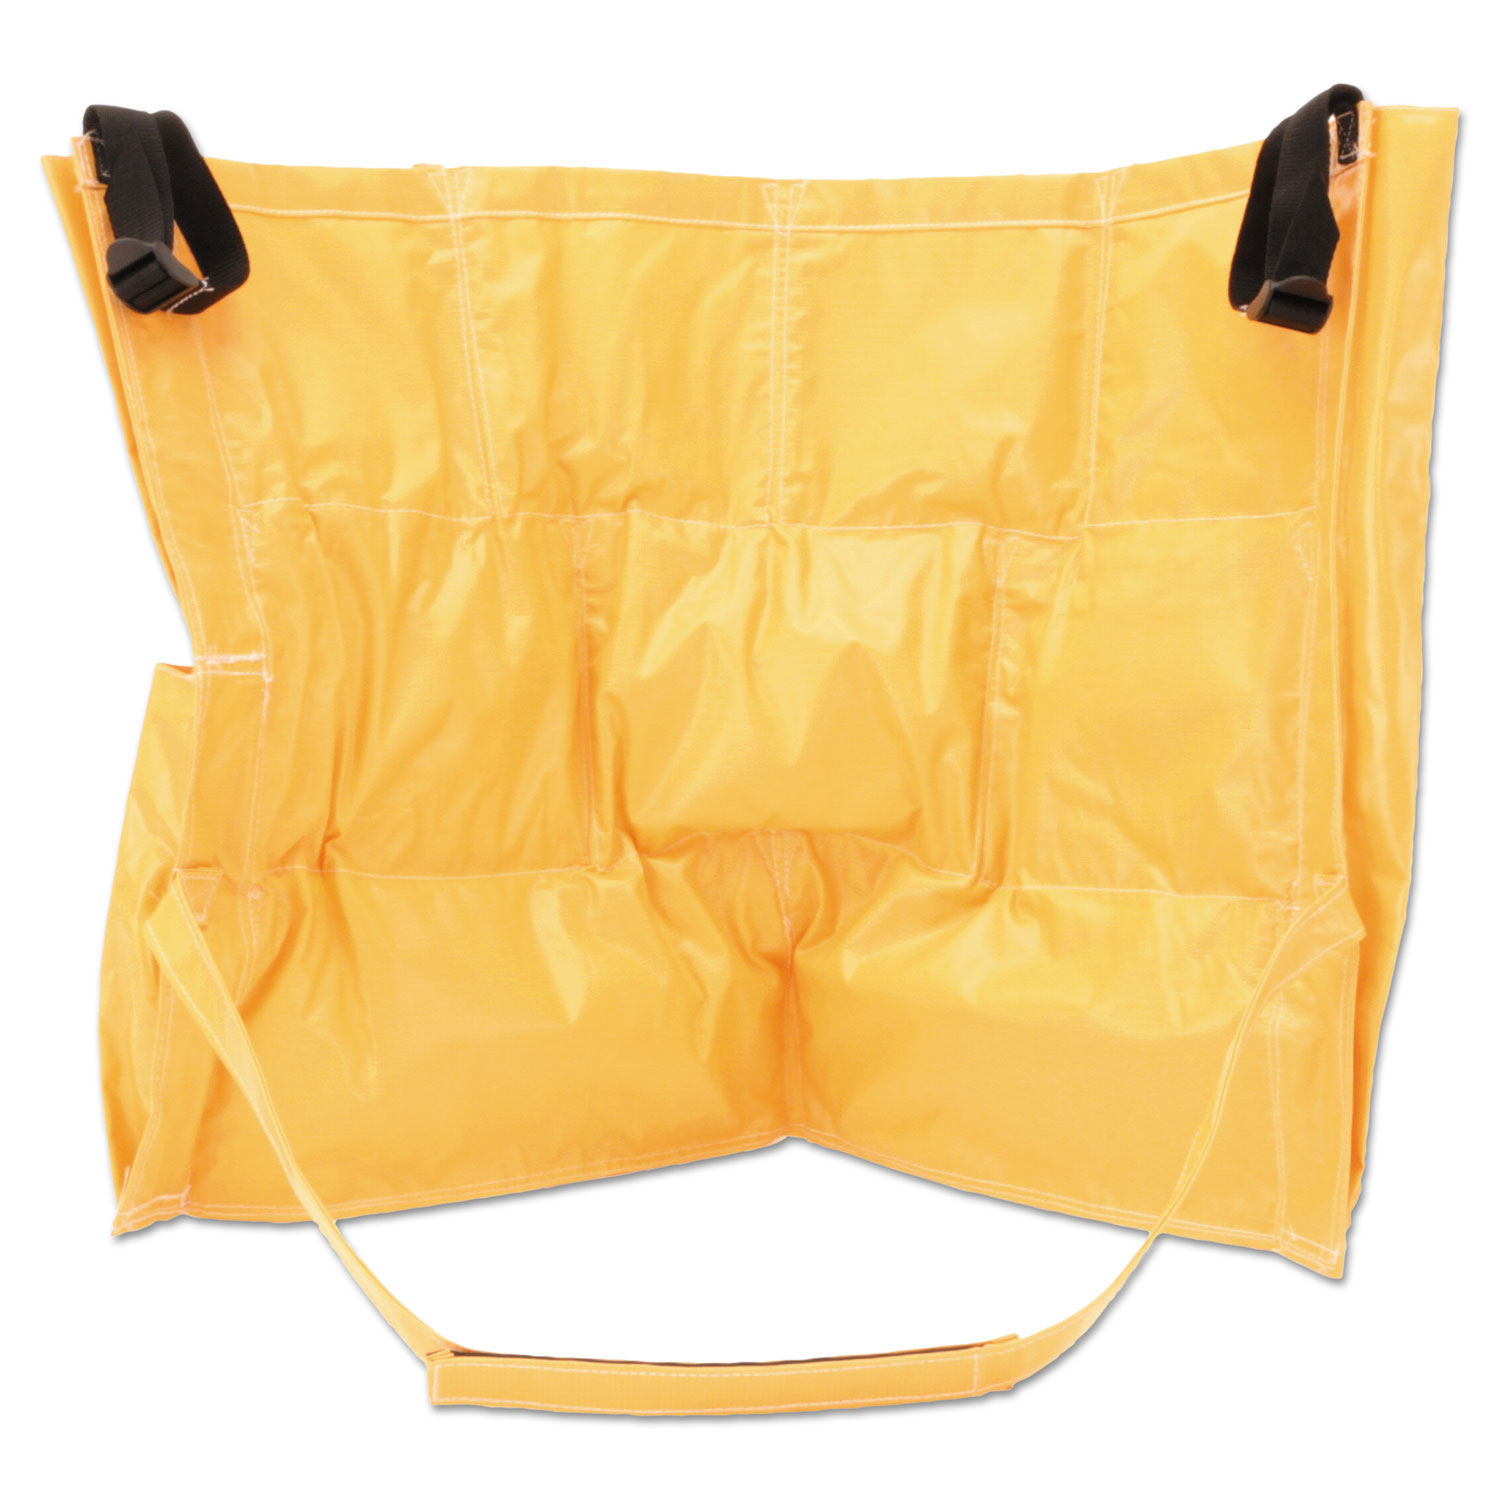 Brute Caddy Bag, 12 Compartments, Yellow - Buy Janitorial Direct